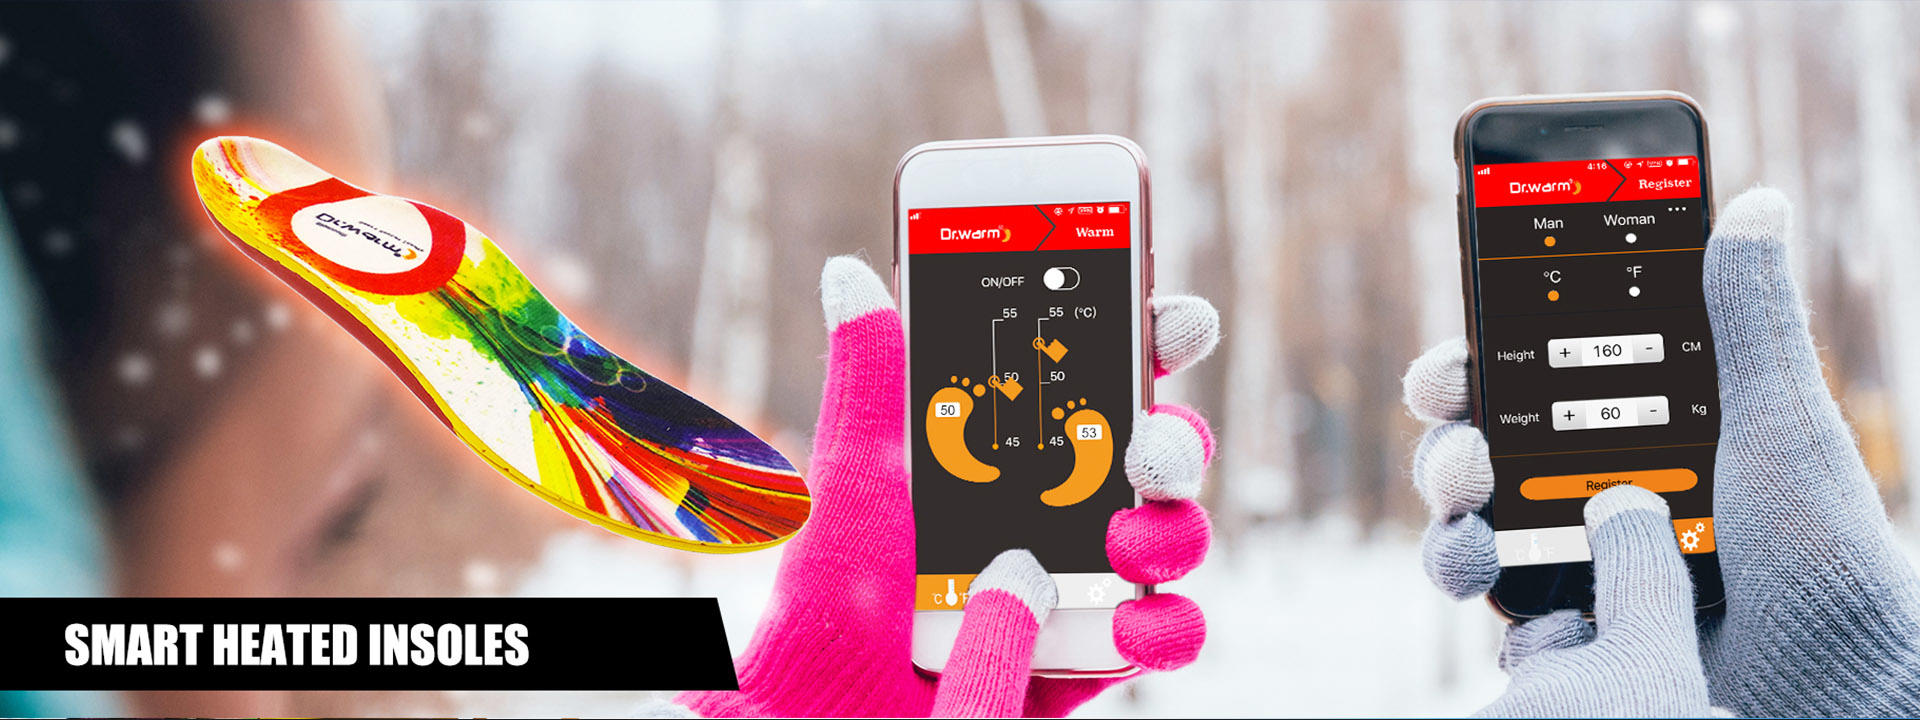 bluetooth heated ski boot insoles dr for outdoor Dr. Warm-4